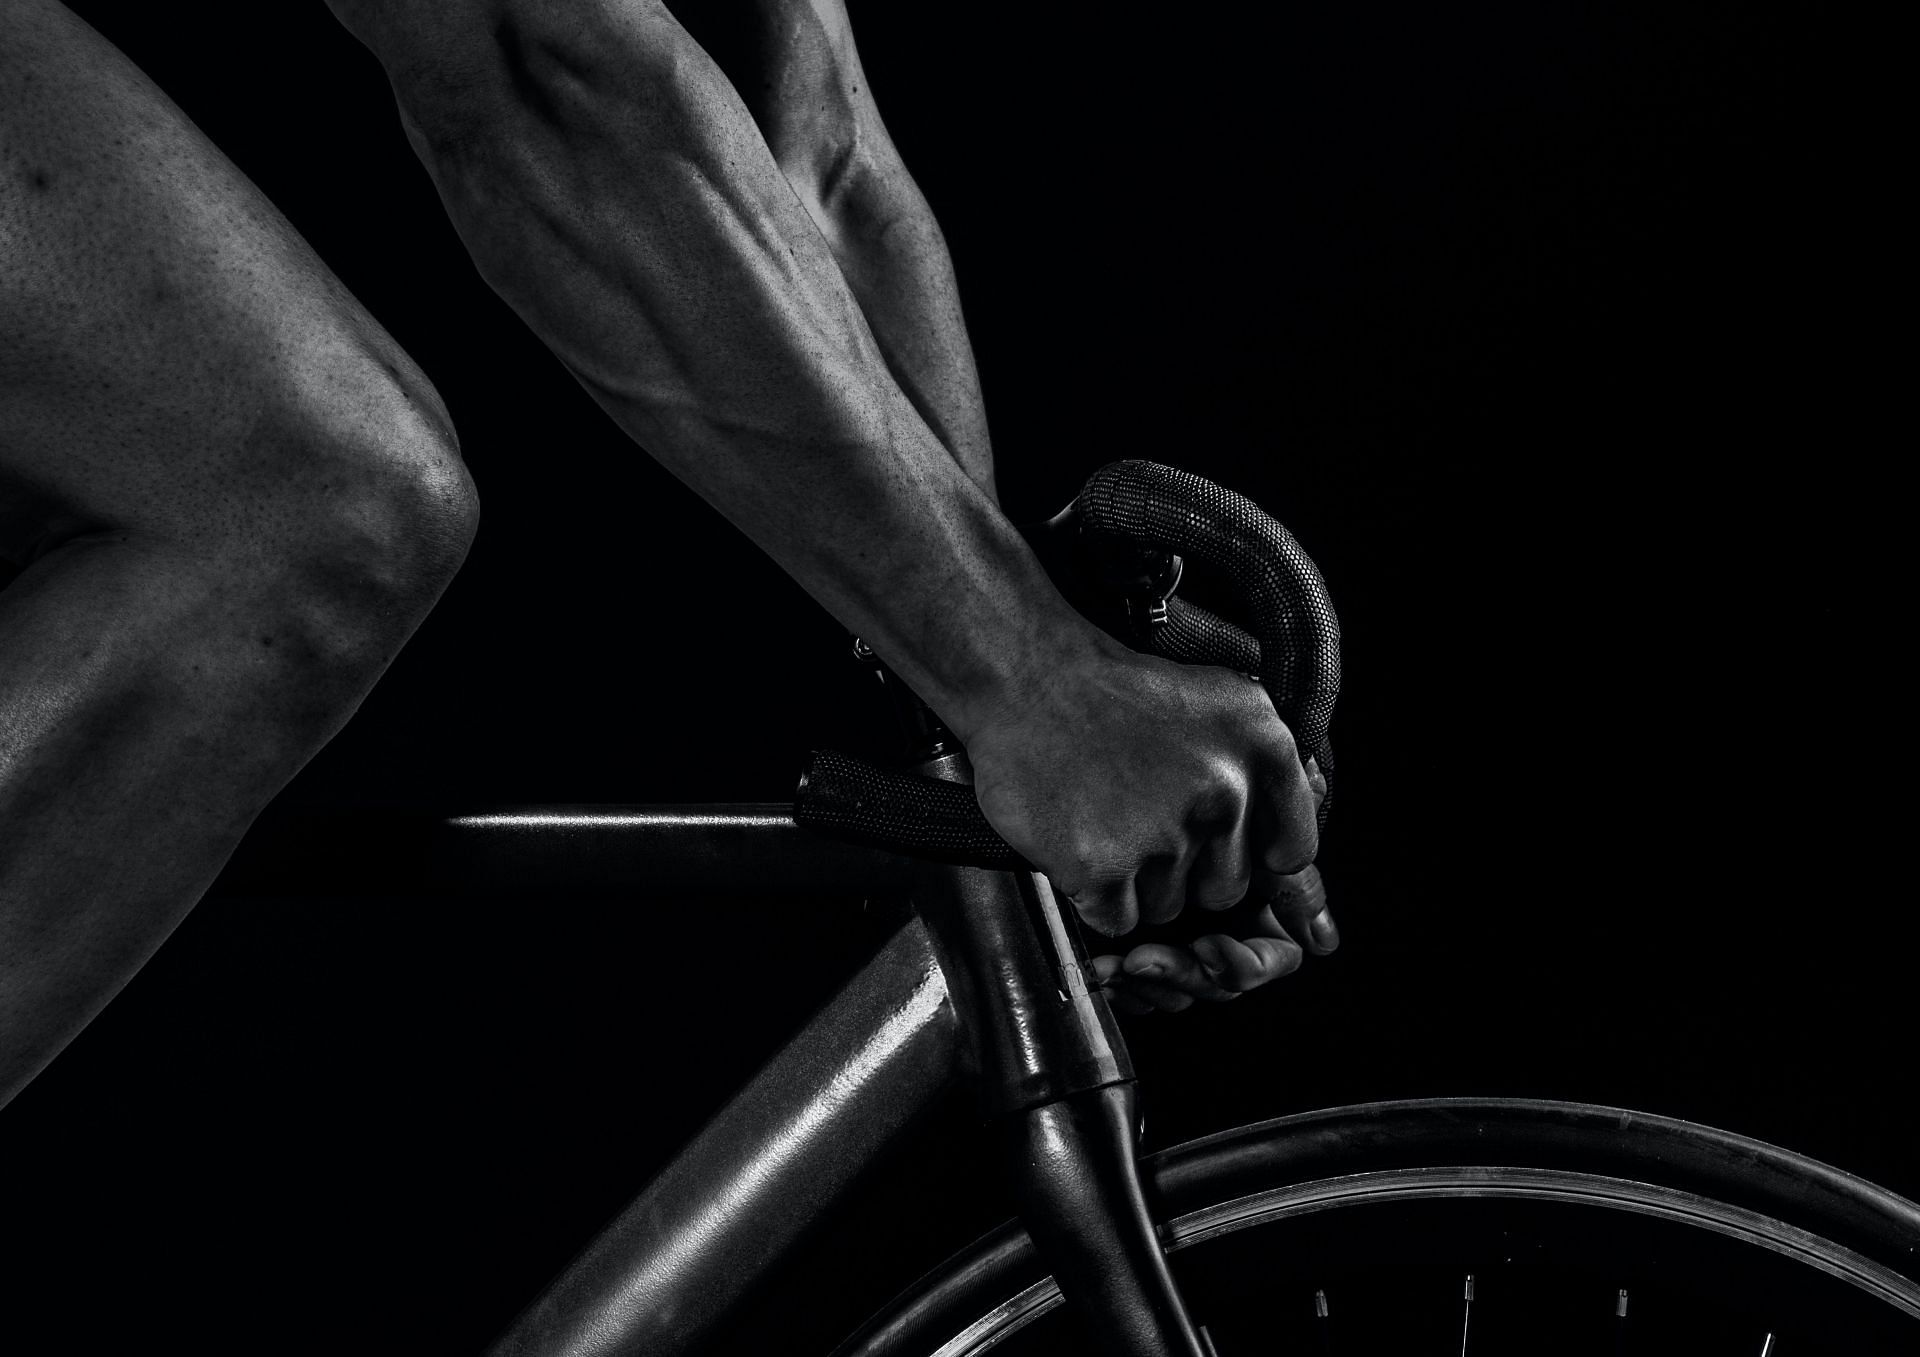 Stationary bike is an excellent equipment for cardio. (Image via Unsplash / Josh Nuttall)